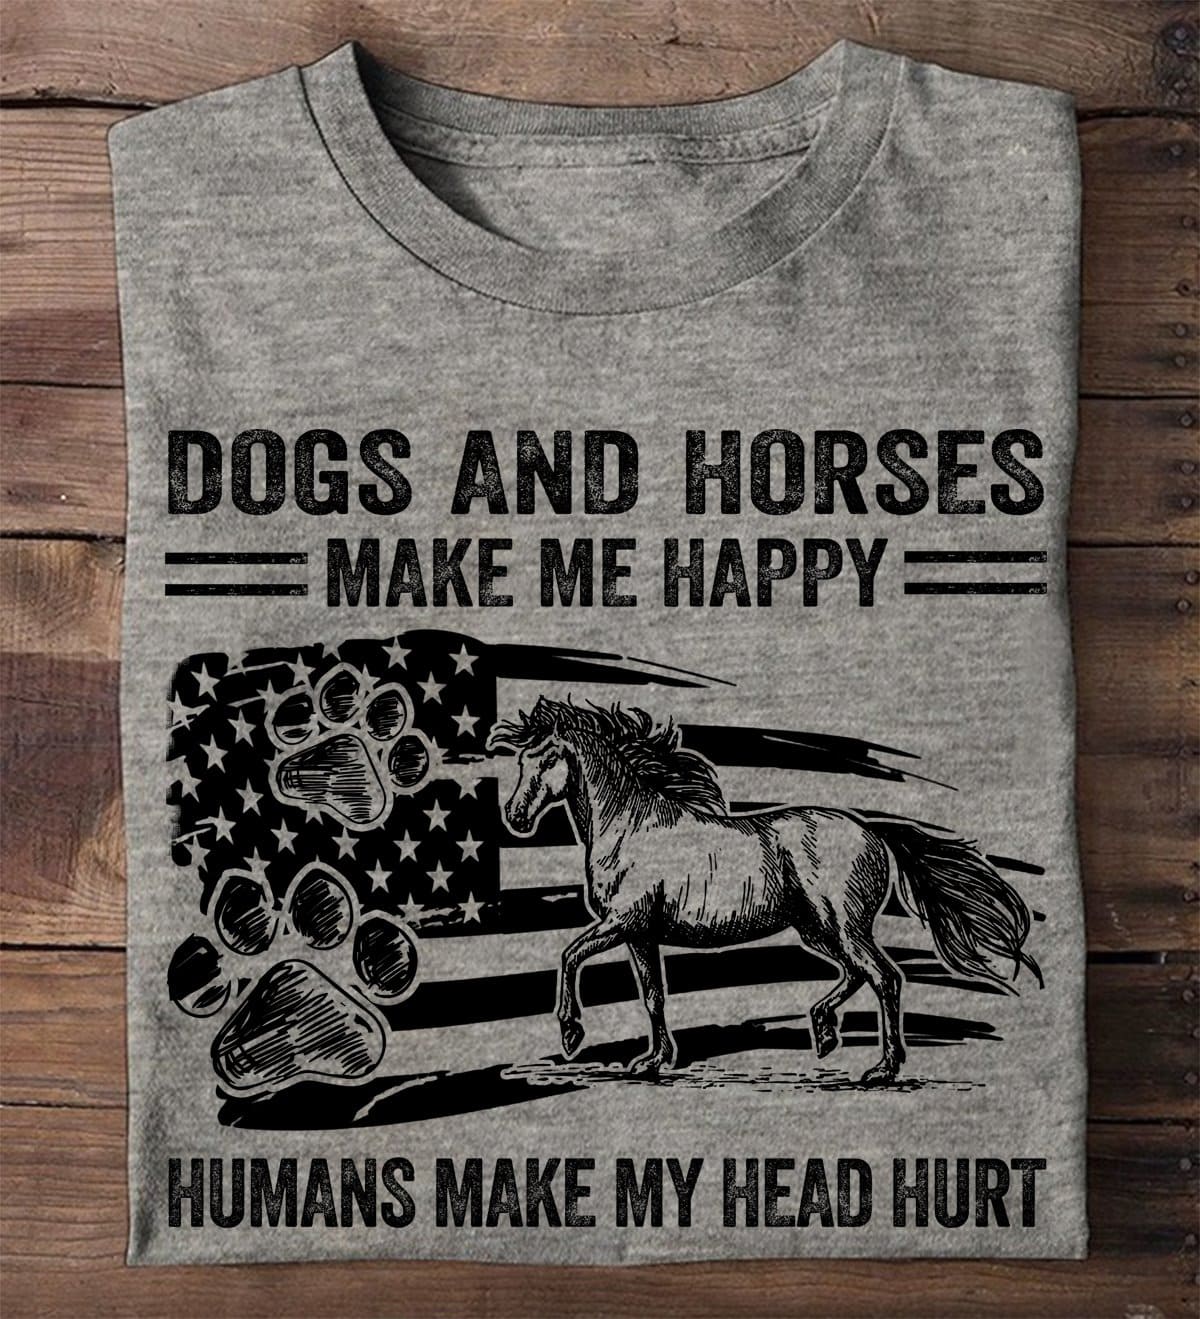 Dogs and horses make me happy, humans make my head hurt - America dog lover